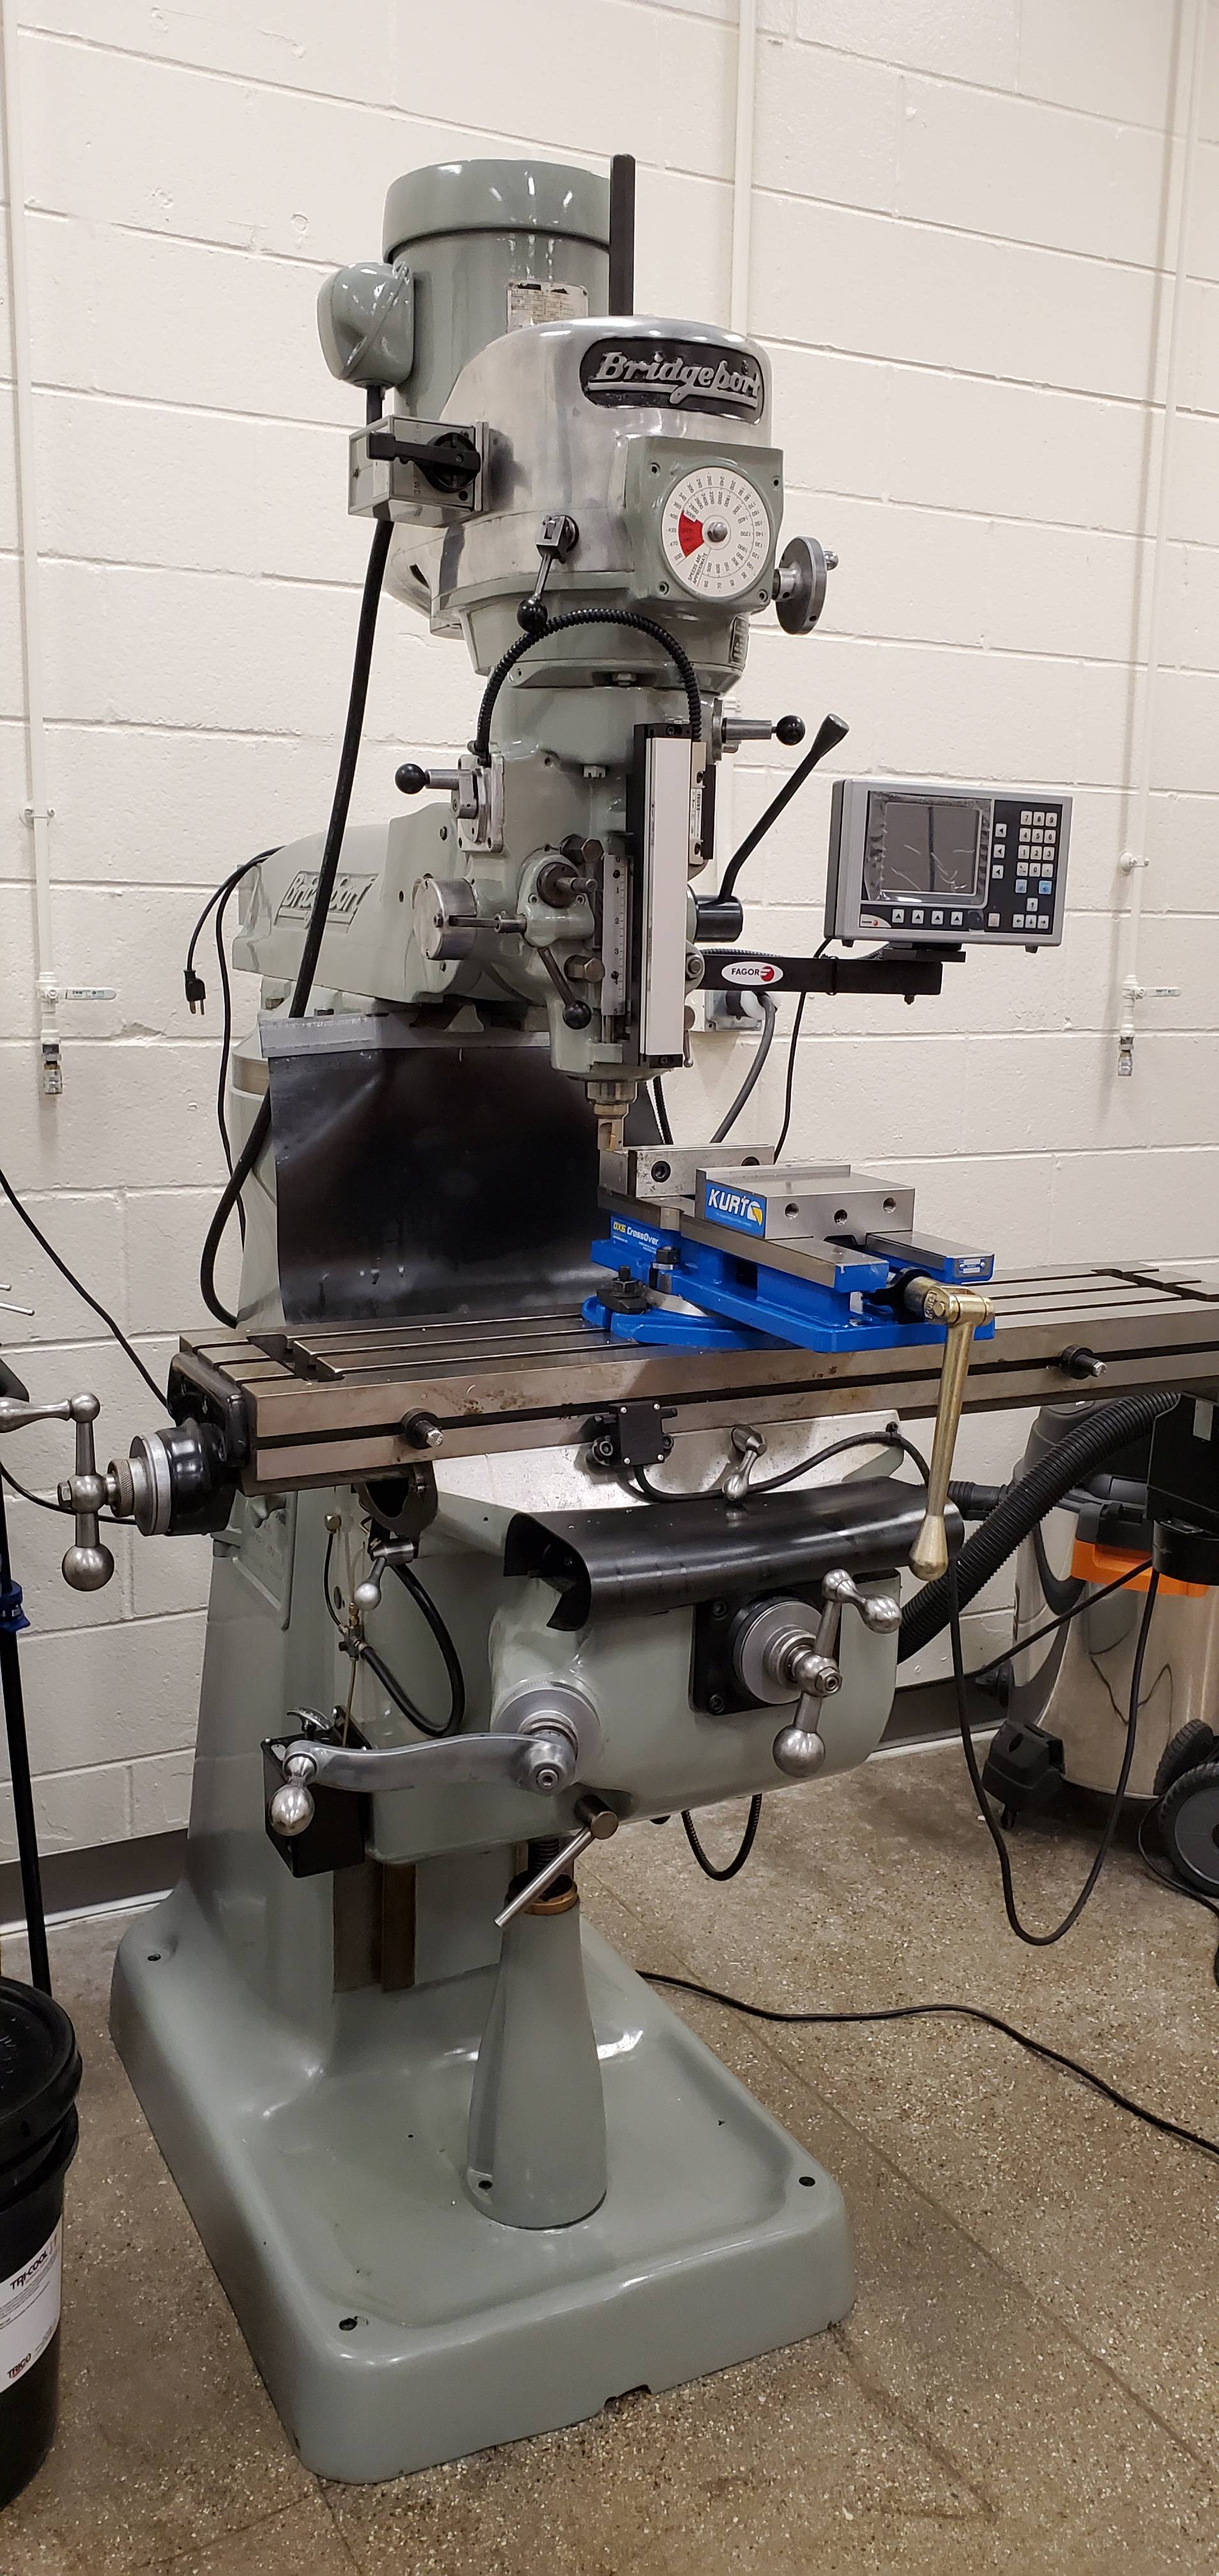 manual milling machine in the fabrication lab